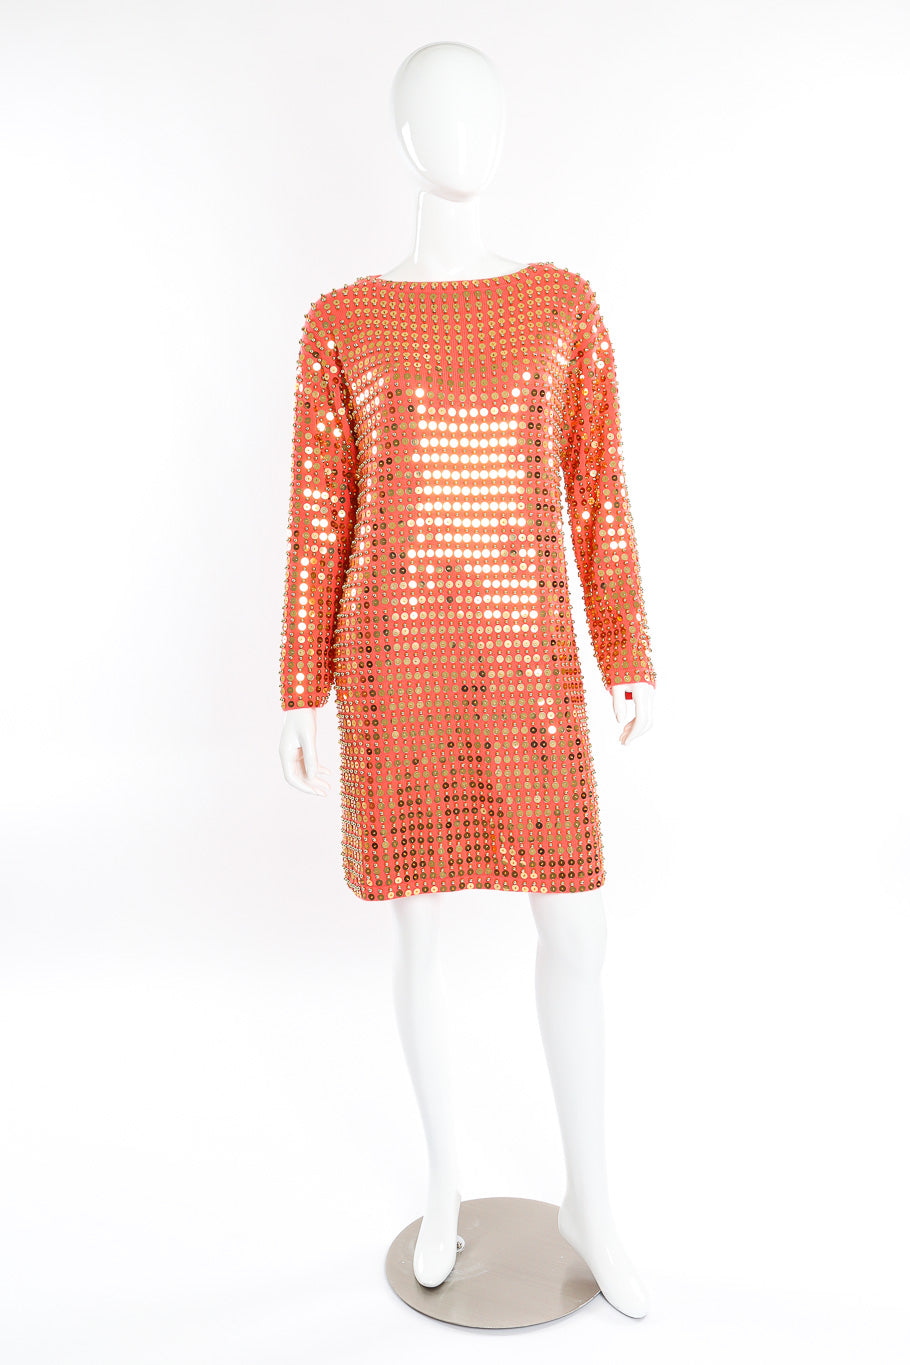 Cashmere sequin sweater dress by Michael Kors on mannequin front full @recessla